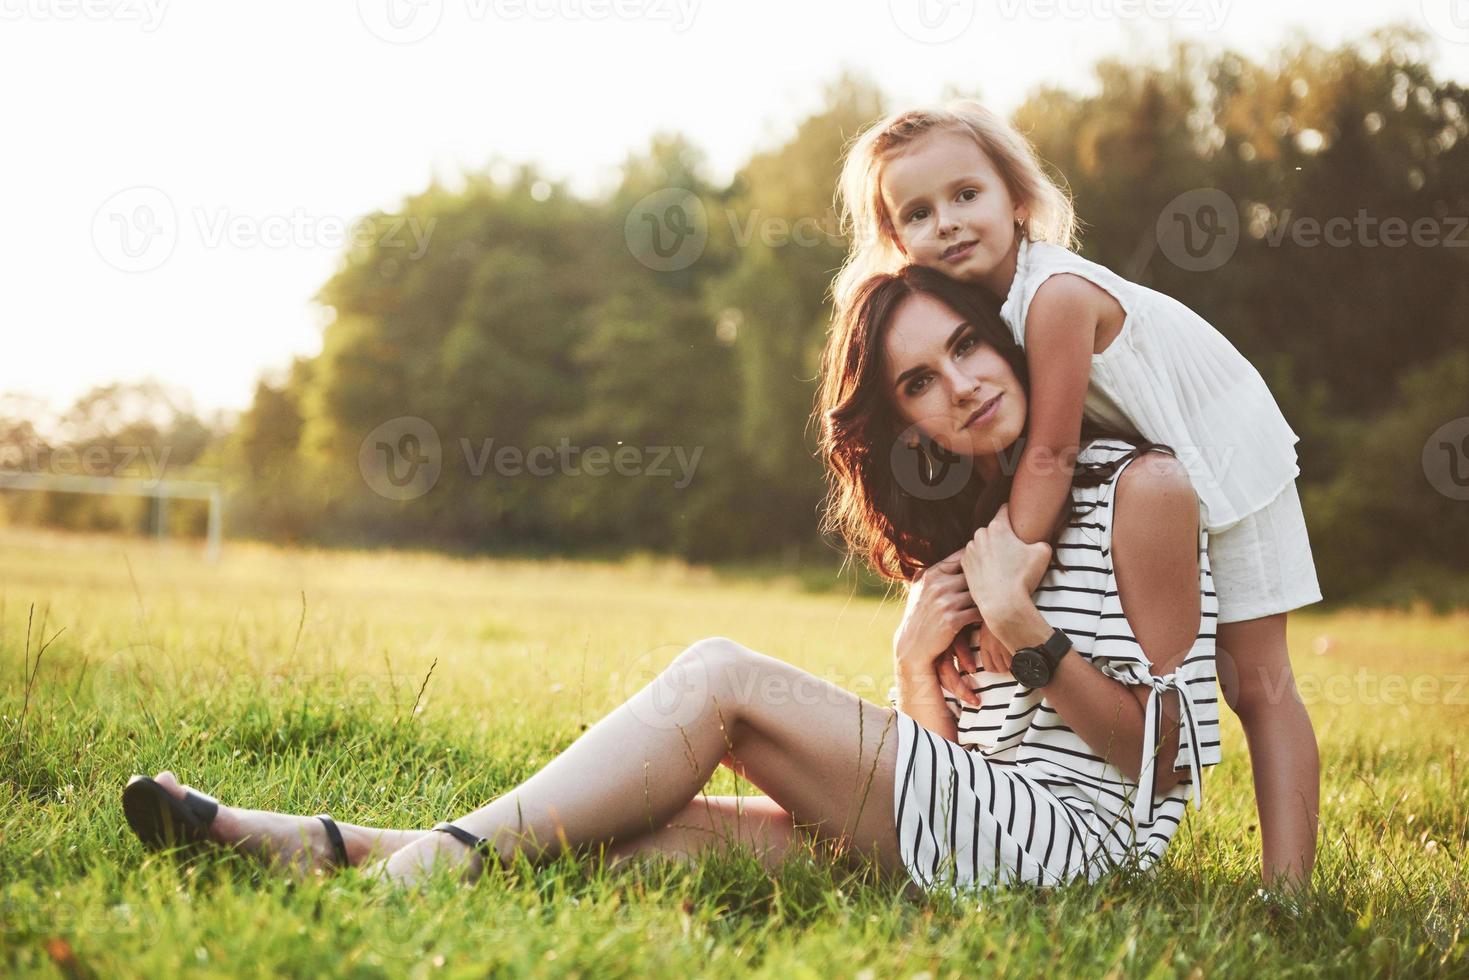 Happy mother and daughter hugging in a park in the sun on a bright summer background of herbs. photo